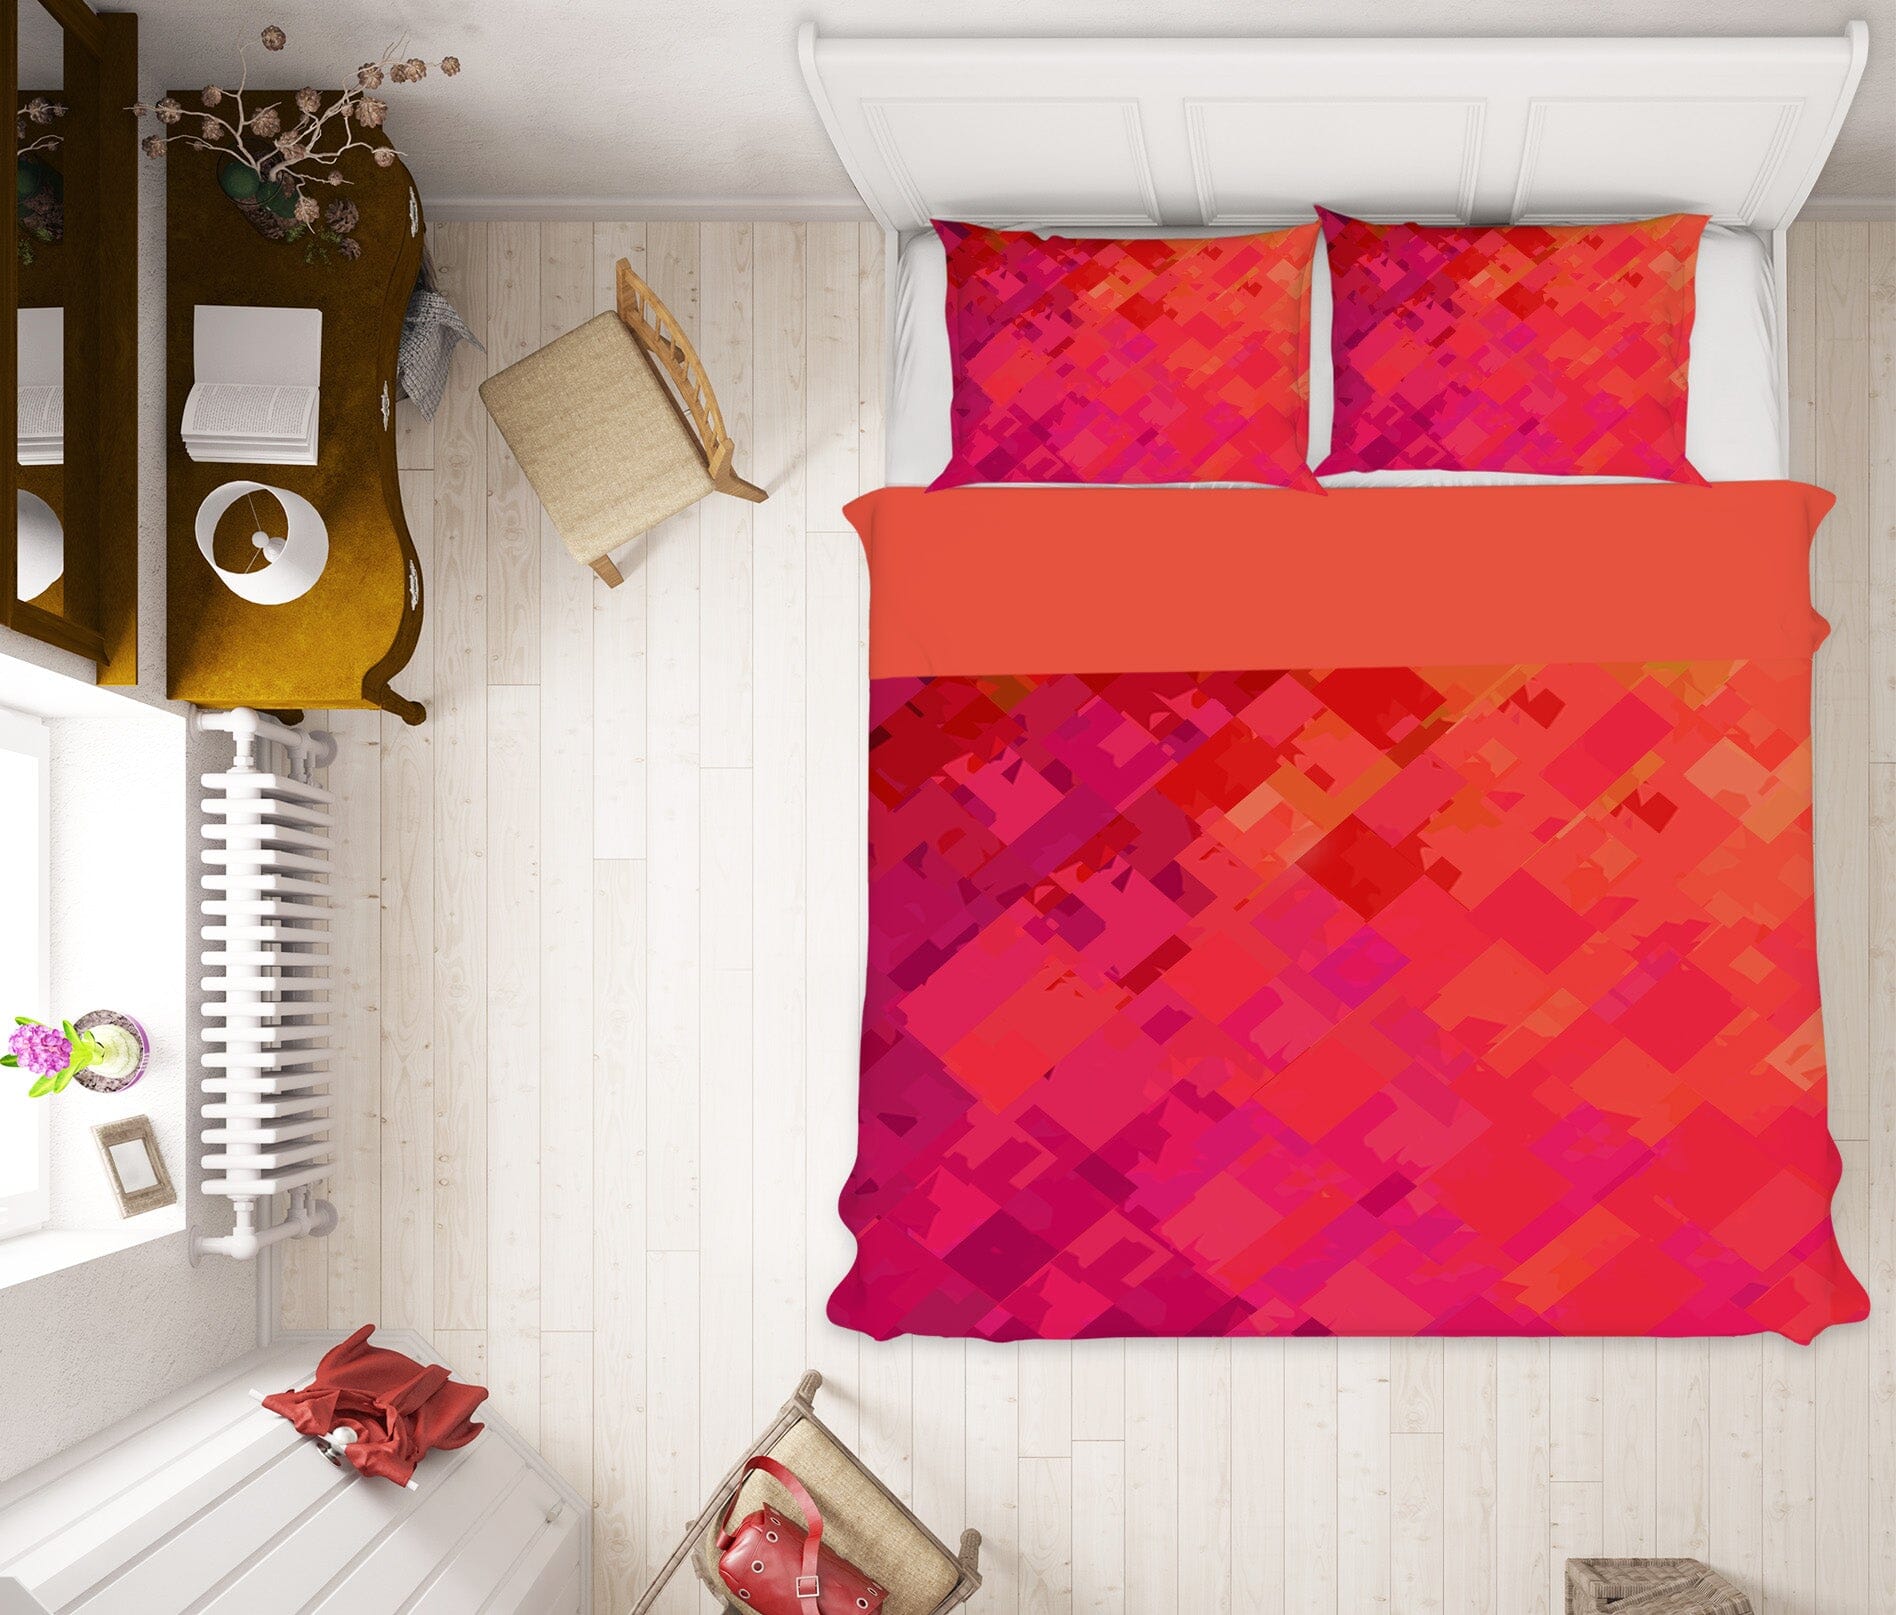 3D Orange Red Graffiti 2005 Shandra Smith Bedding Bed Pillowcases Quilt Quiet Covers AJ Creativity Home 